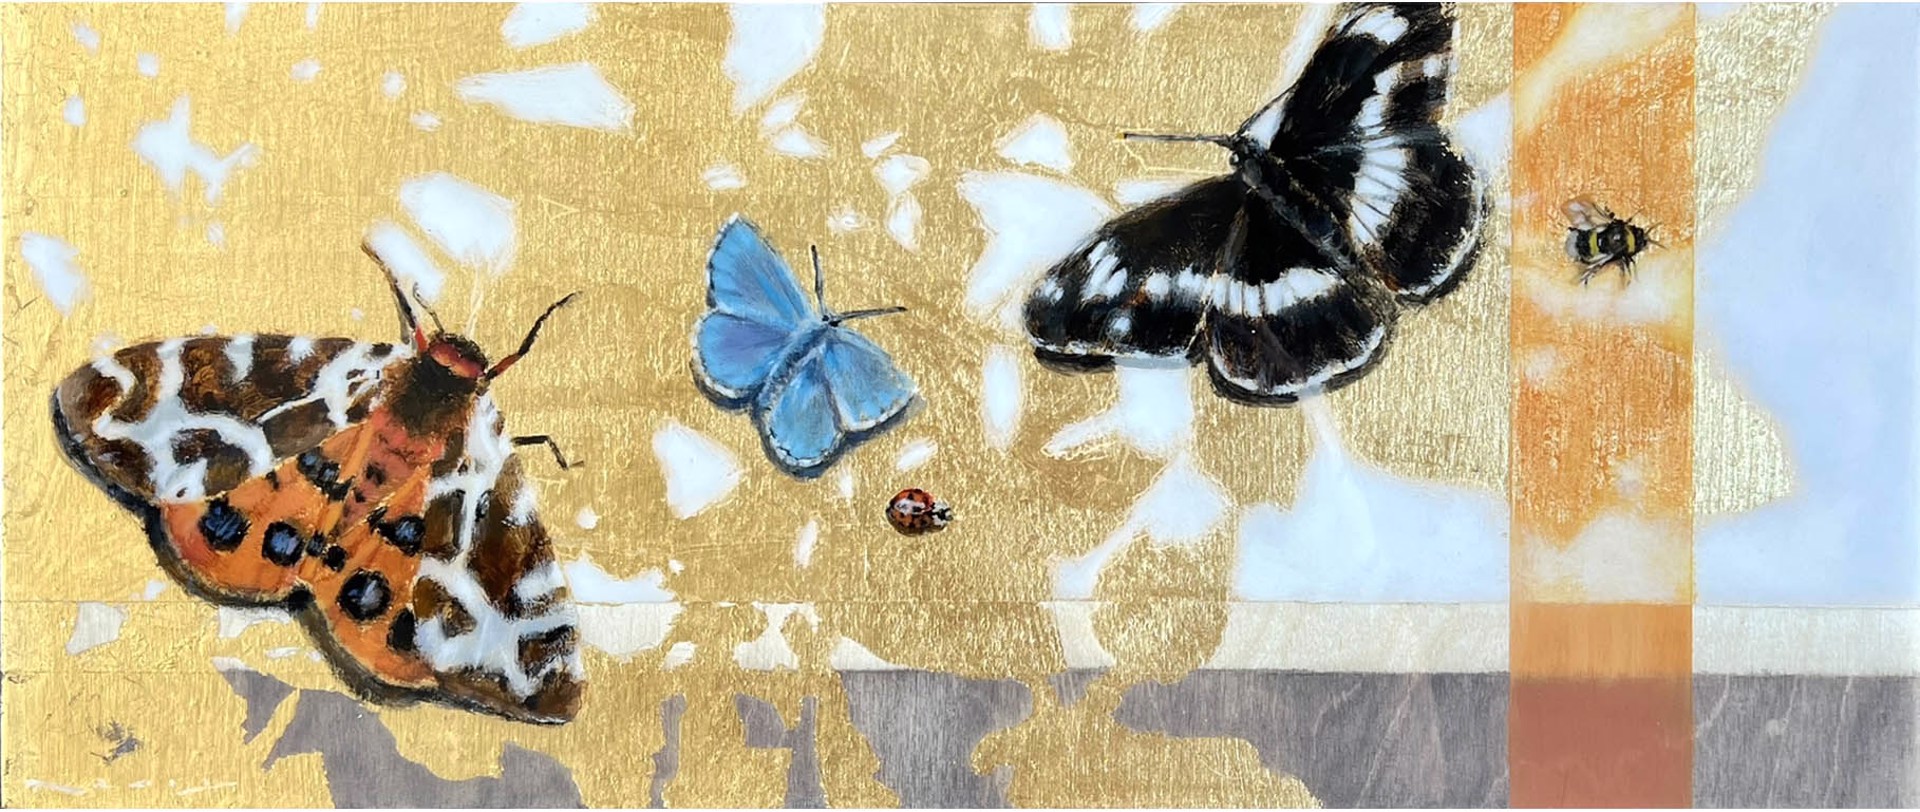 Original Artwork Featuring Moths, Butterflies And Ladybugs On Abstract Background With Gold Leaf Details And Wood Panel Showing Through Resin